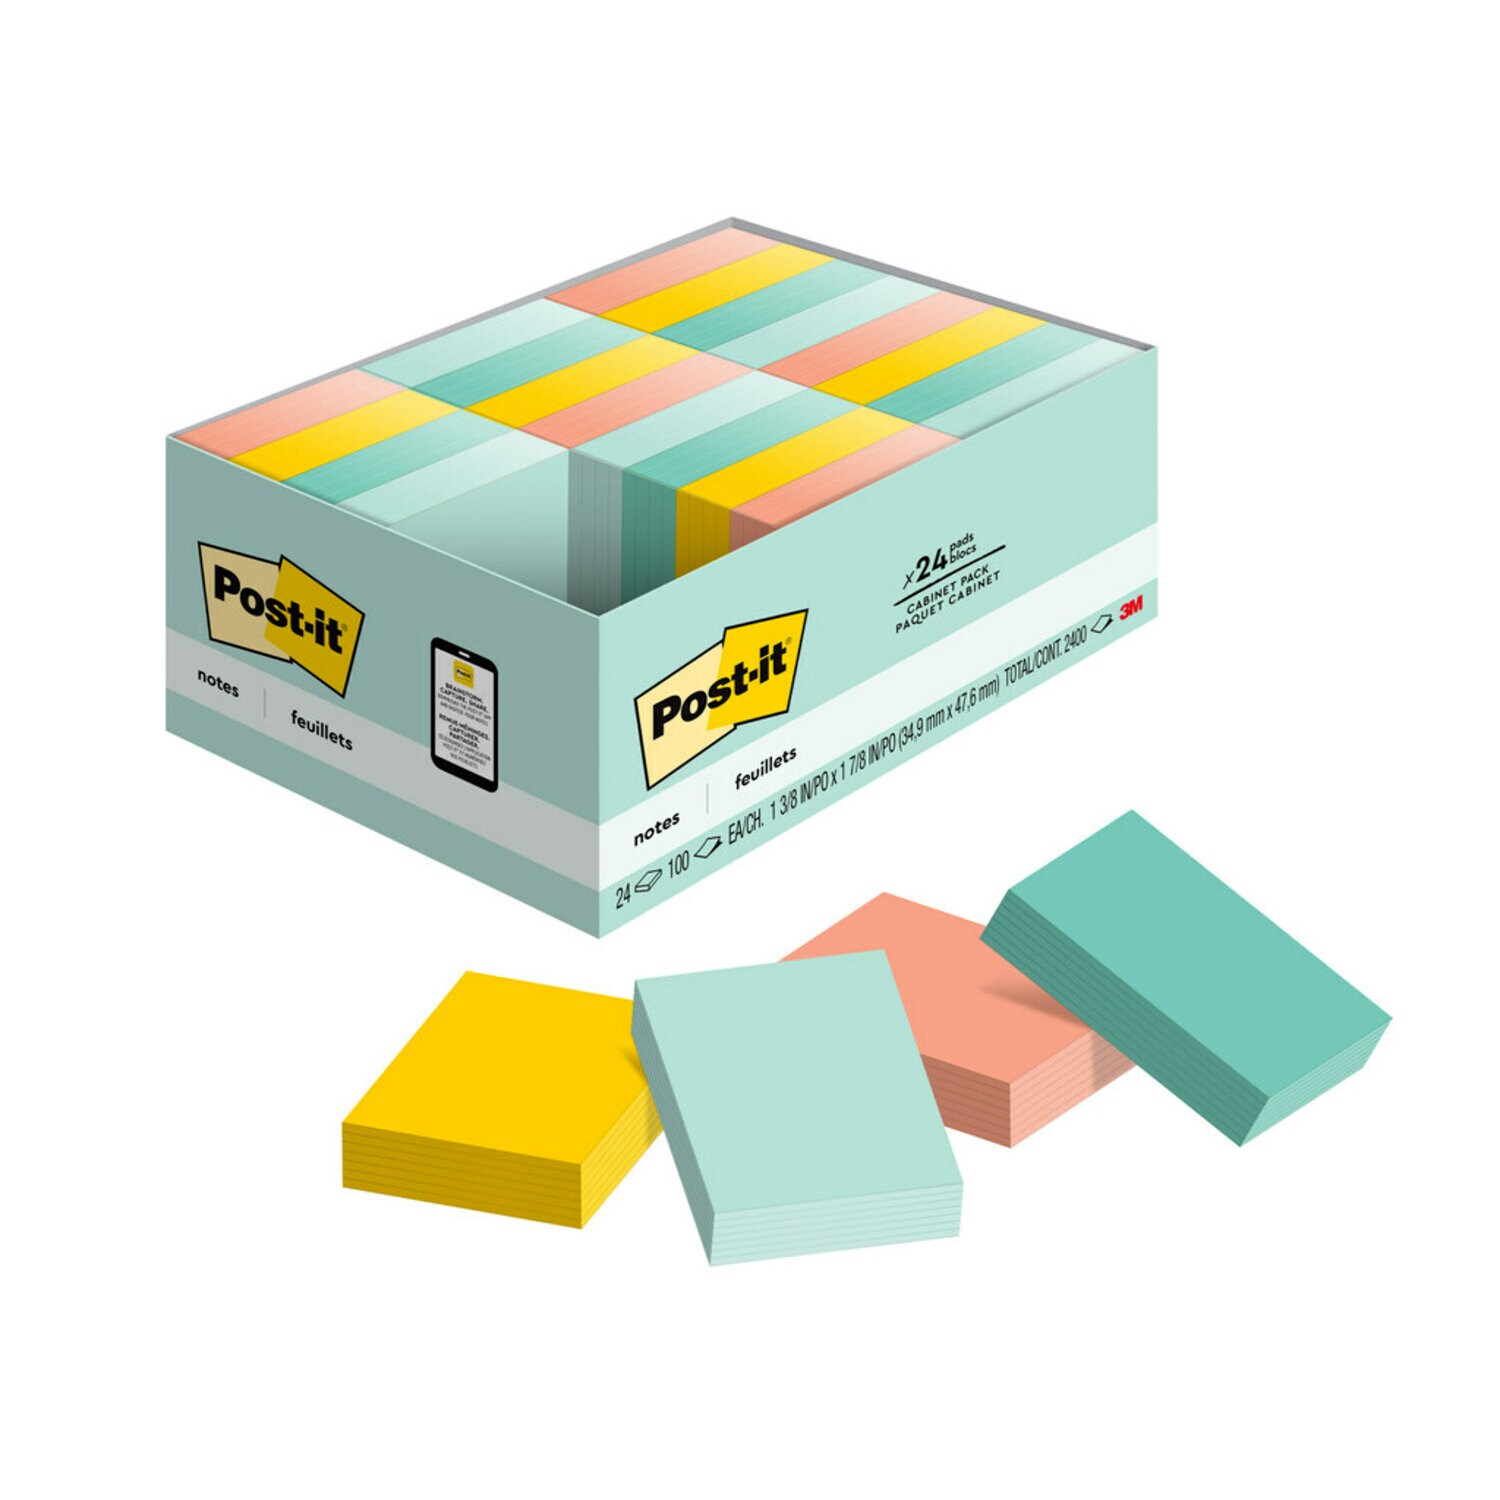 7100183007 - Post-it Notes 653-24APVAD, 1 3/8 in x 1 7/8 in (34,9 mm x 47,6 mm)